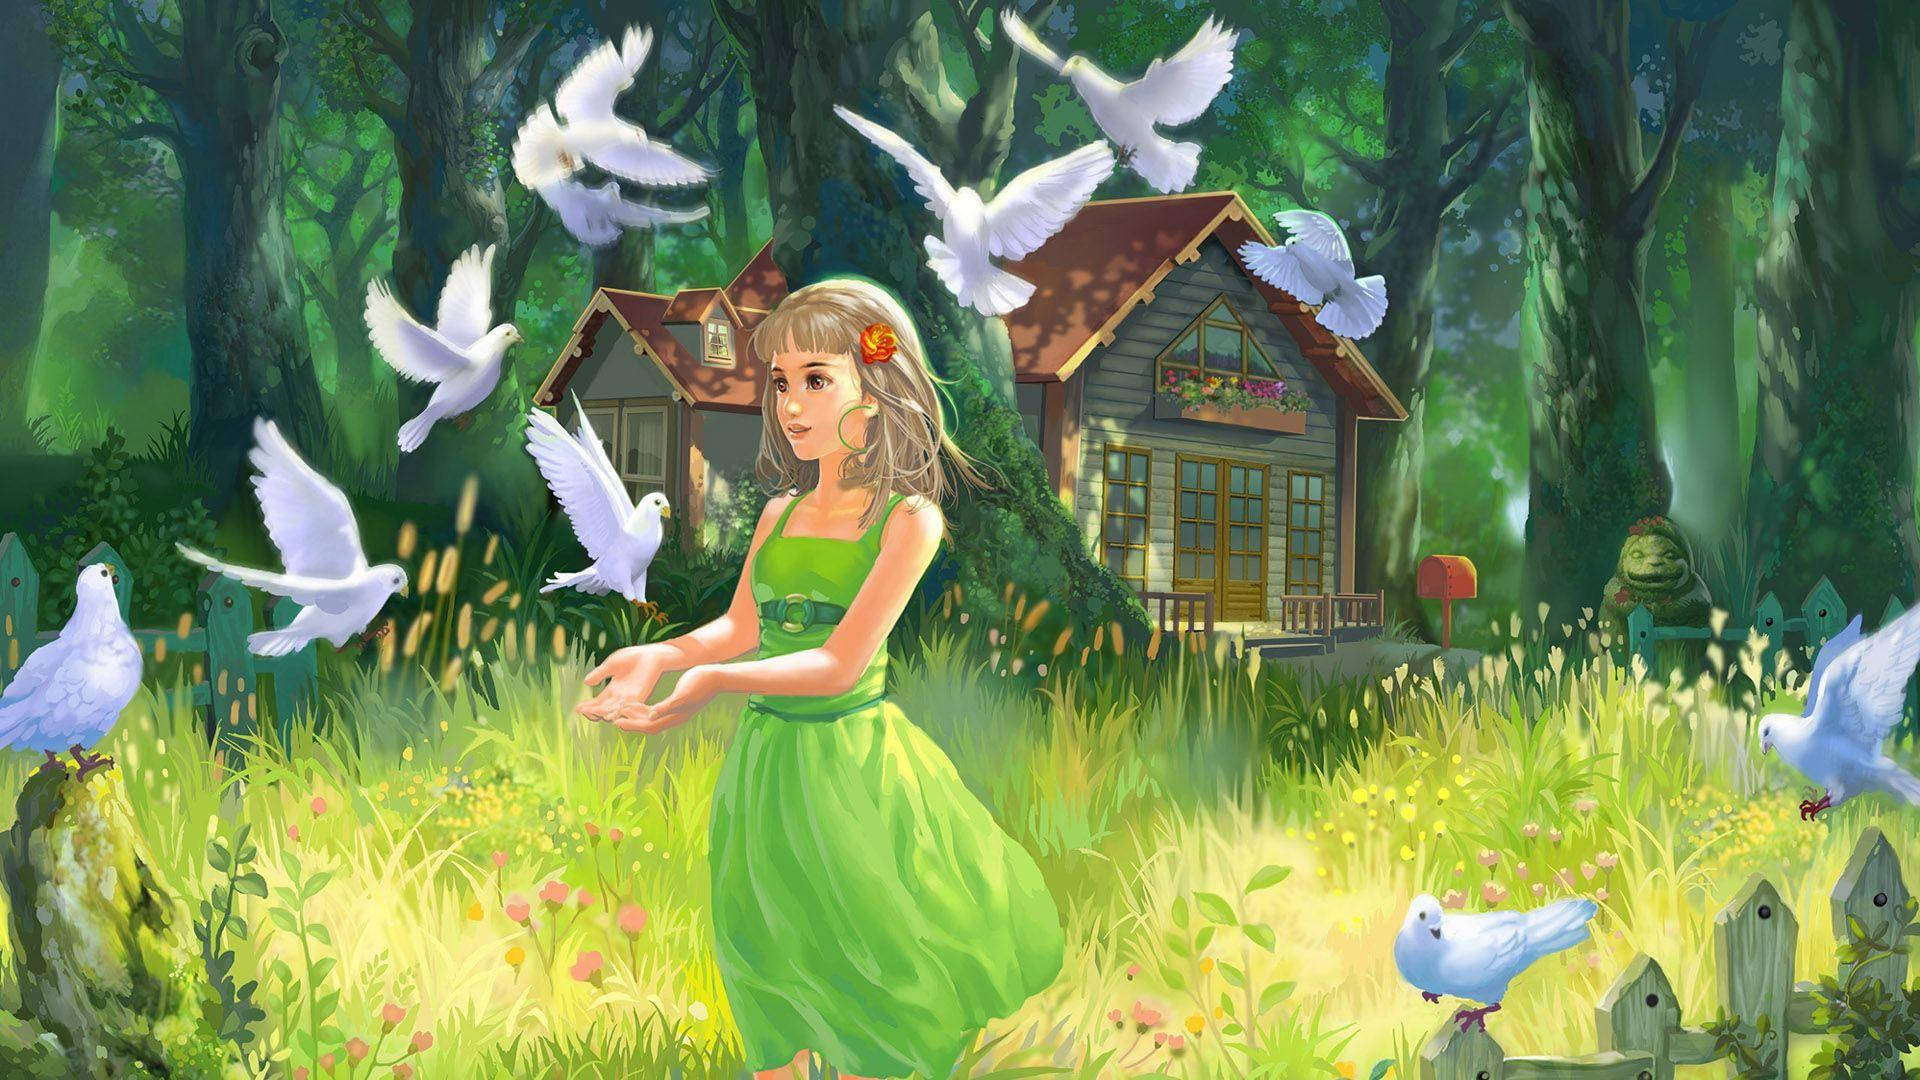 Pretty Girl With Doves Wallpaper